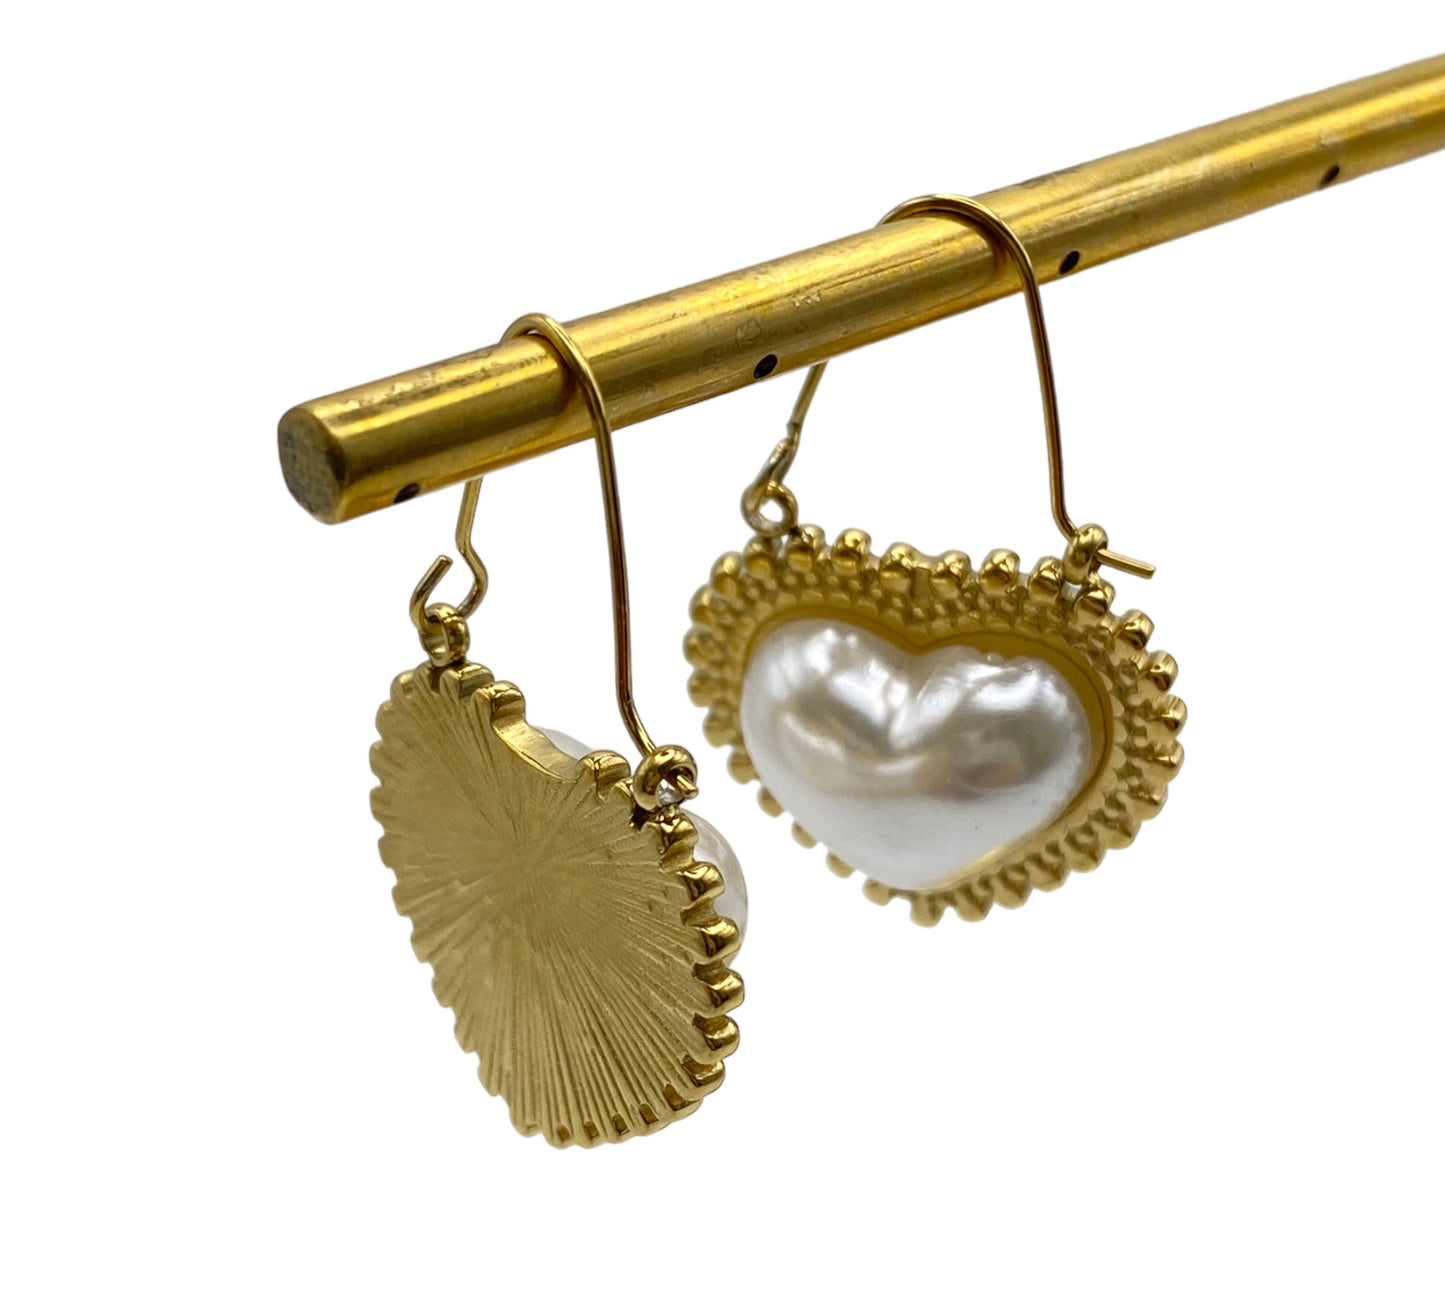 "OLIVIA" gold plated heart shaped earrings with pearl